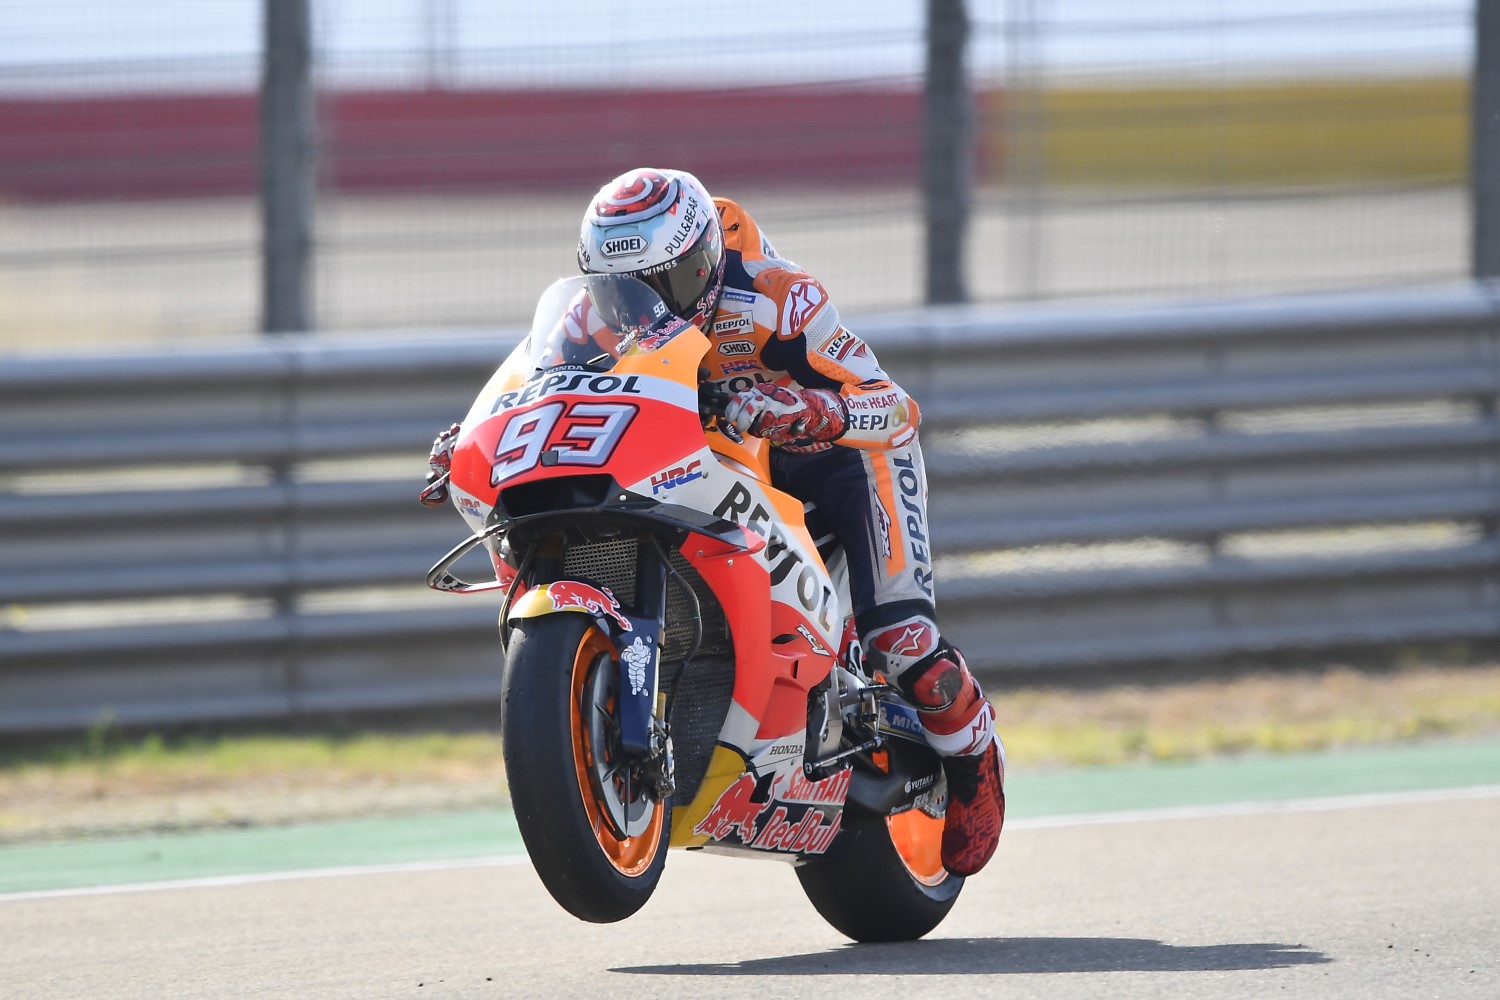 Marc Marquez - can he win in the streets on Indonesia too?